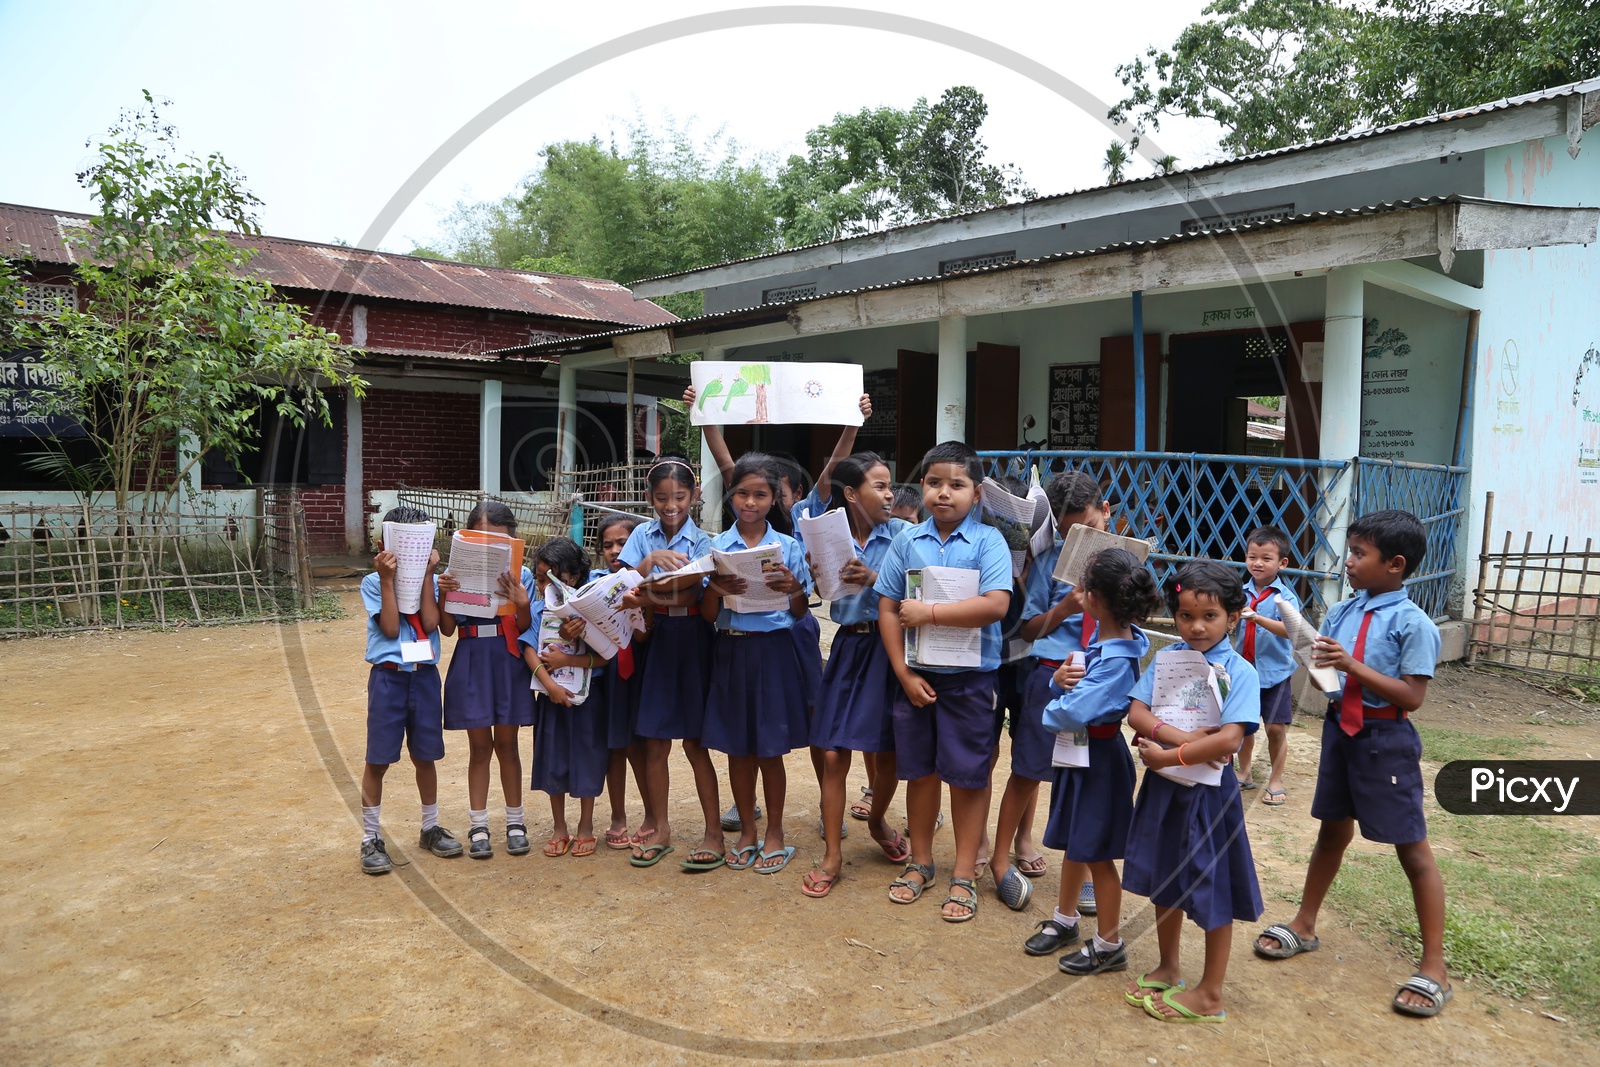 School Children Or School Students Wearing Uniforms  And holding Books  In Hands  In a Rural Village School Premise Or Compound